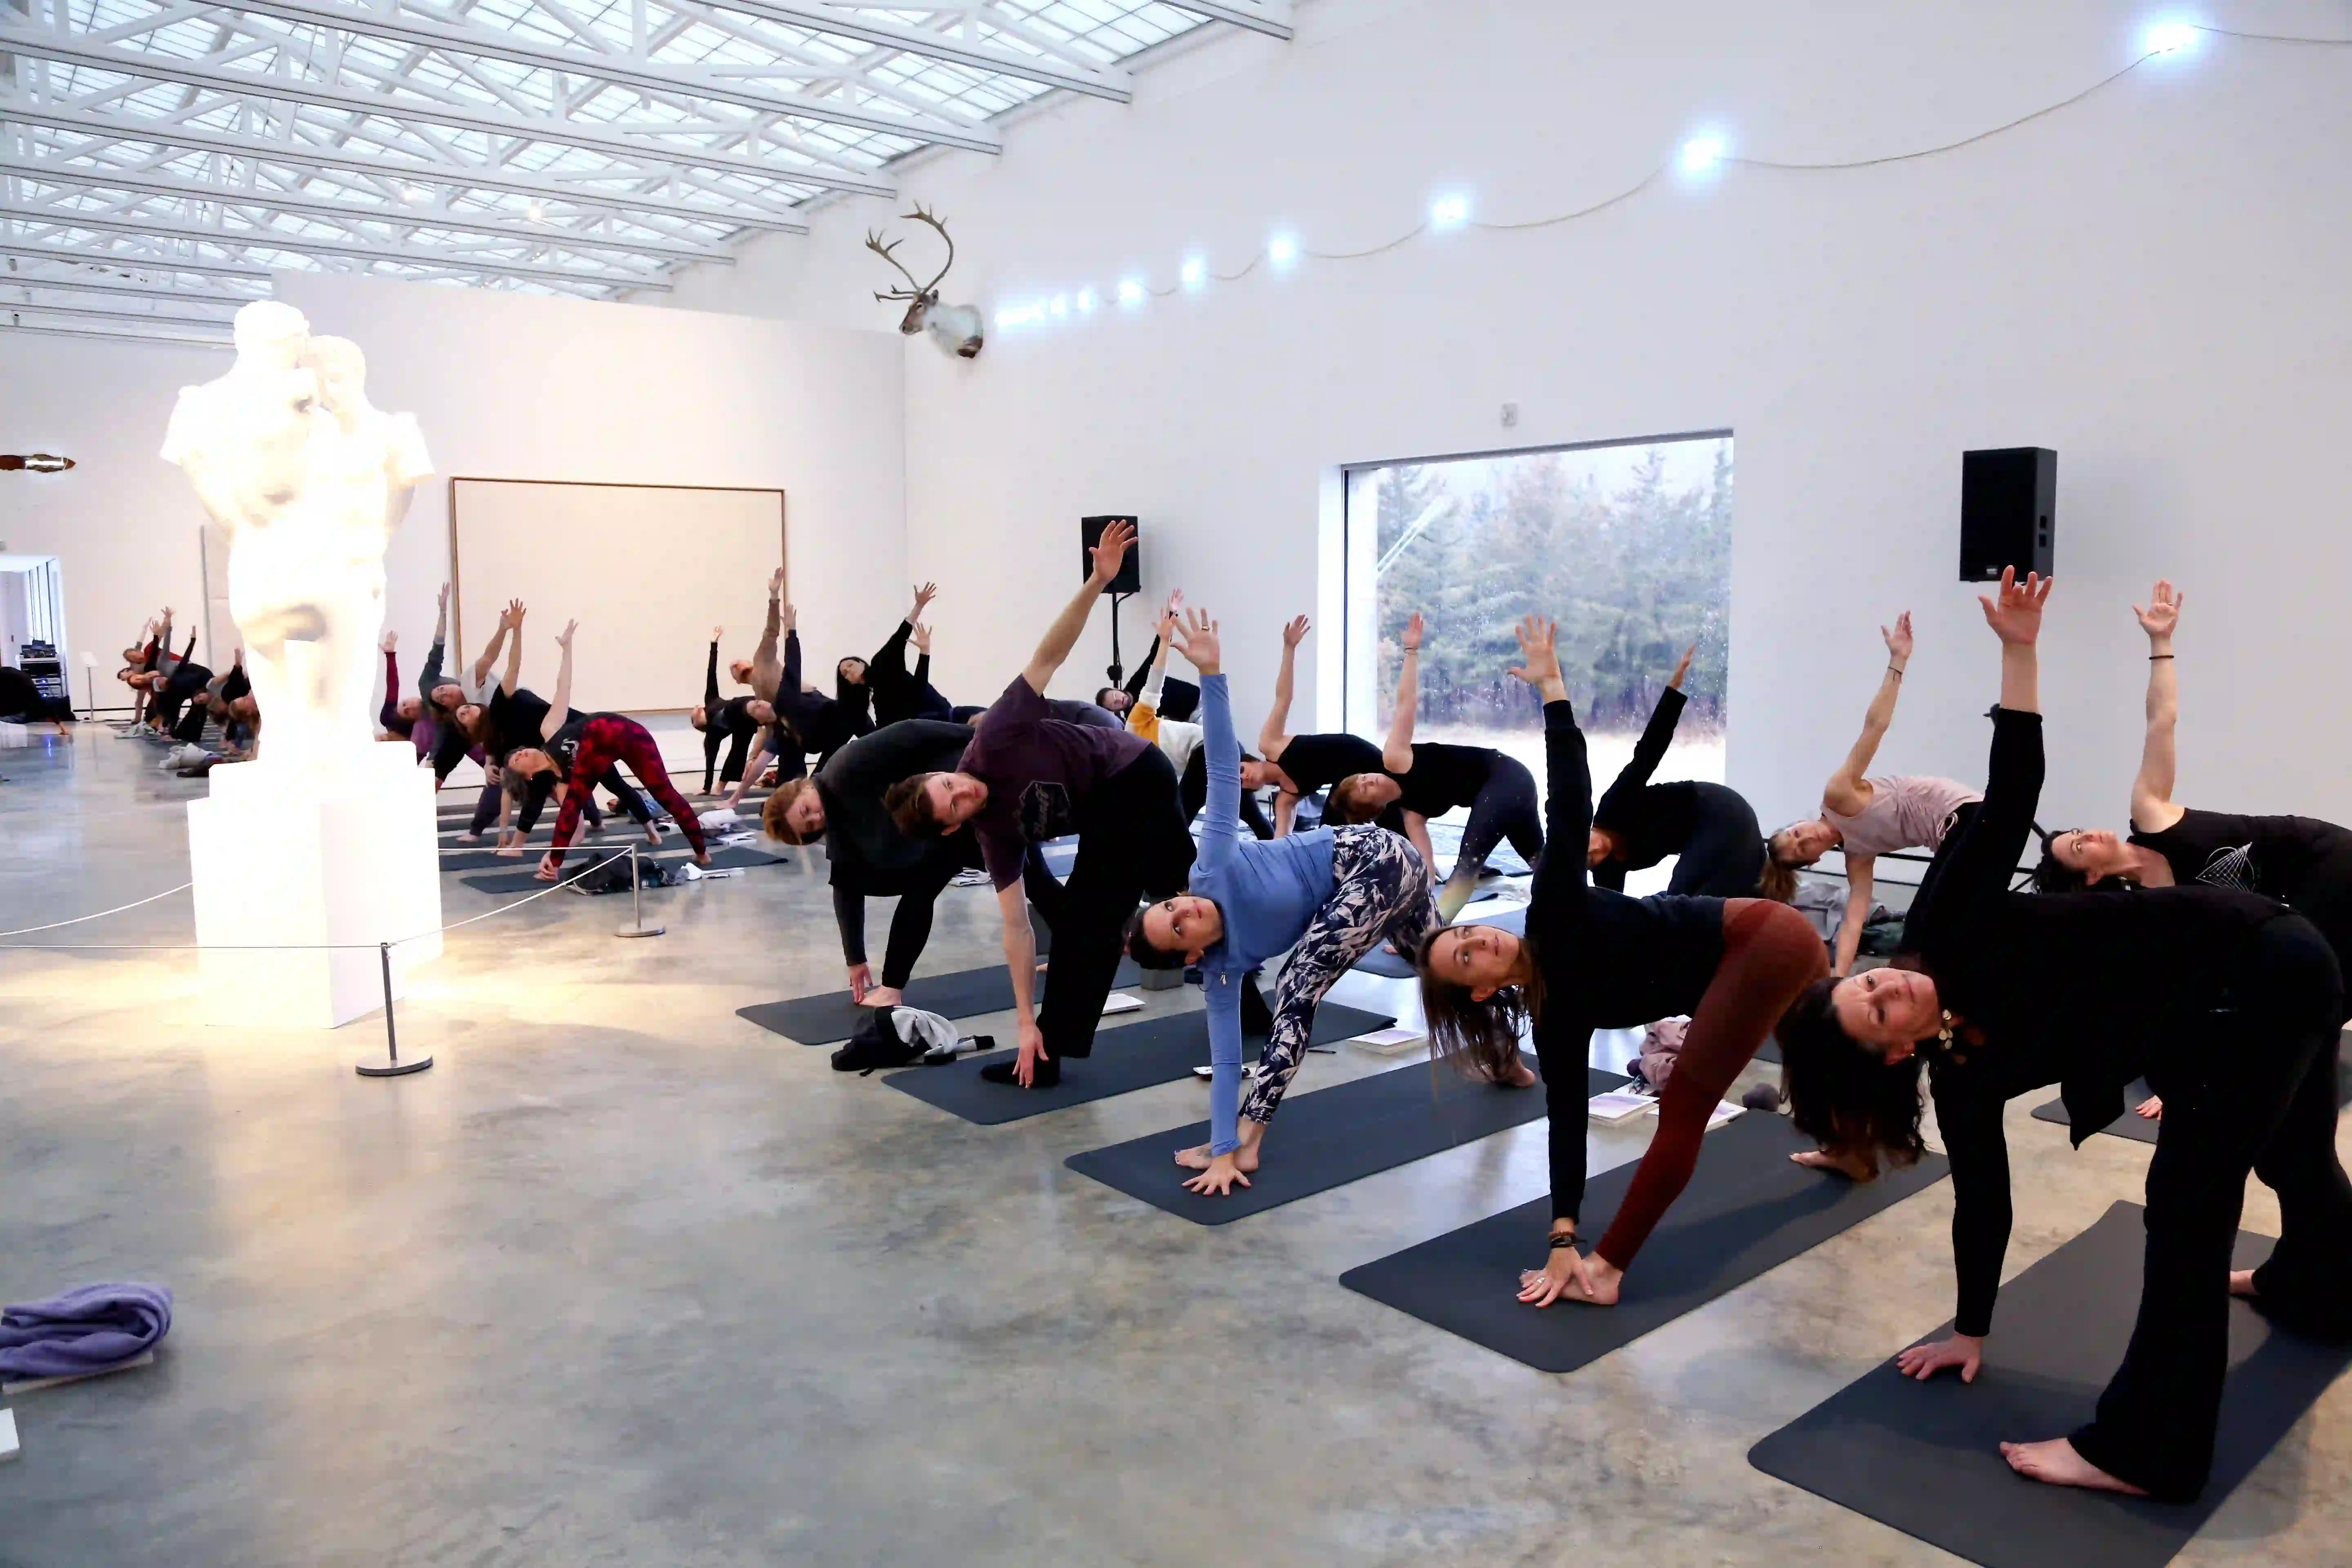 Attendees at the New Year Reflections yoga event, 2019
